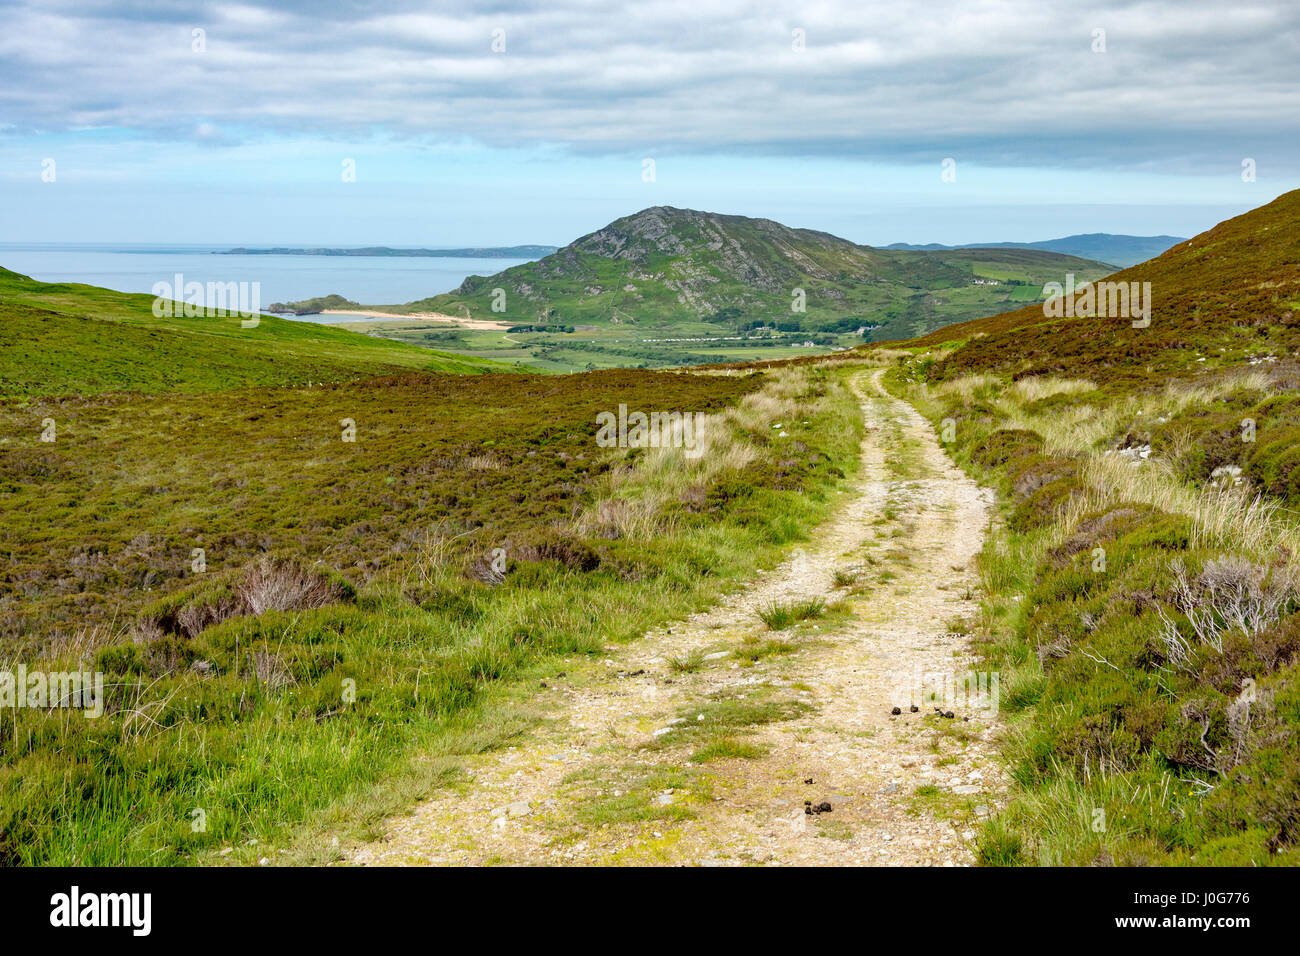 Binnion Hill from the track in Butler's Glen, County Donegal, Ireland Stock Photo